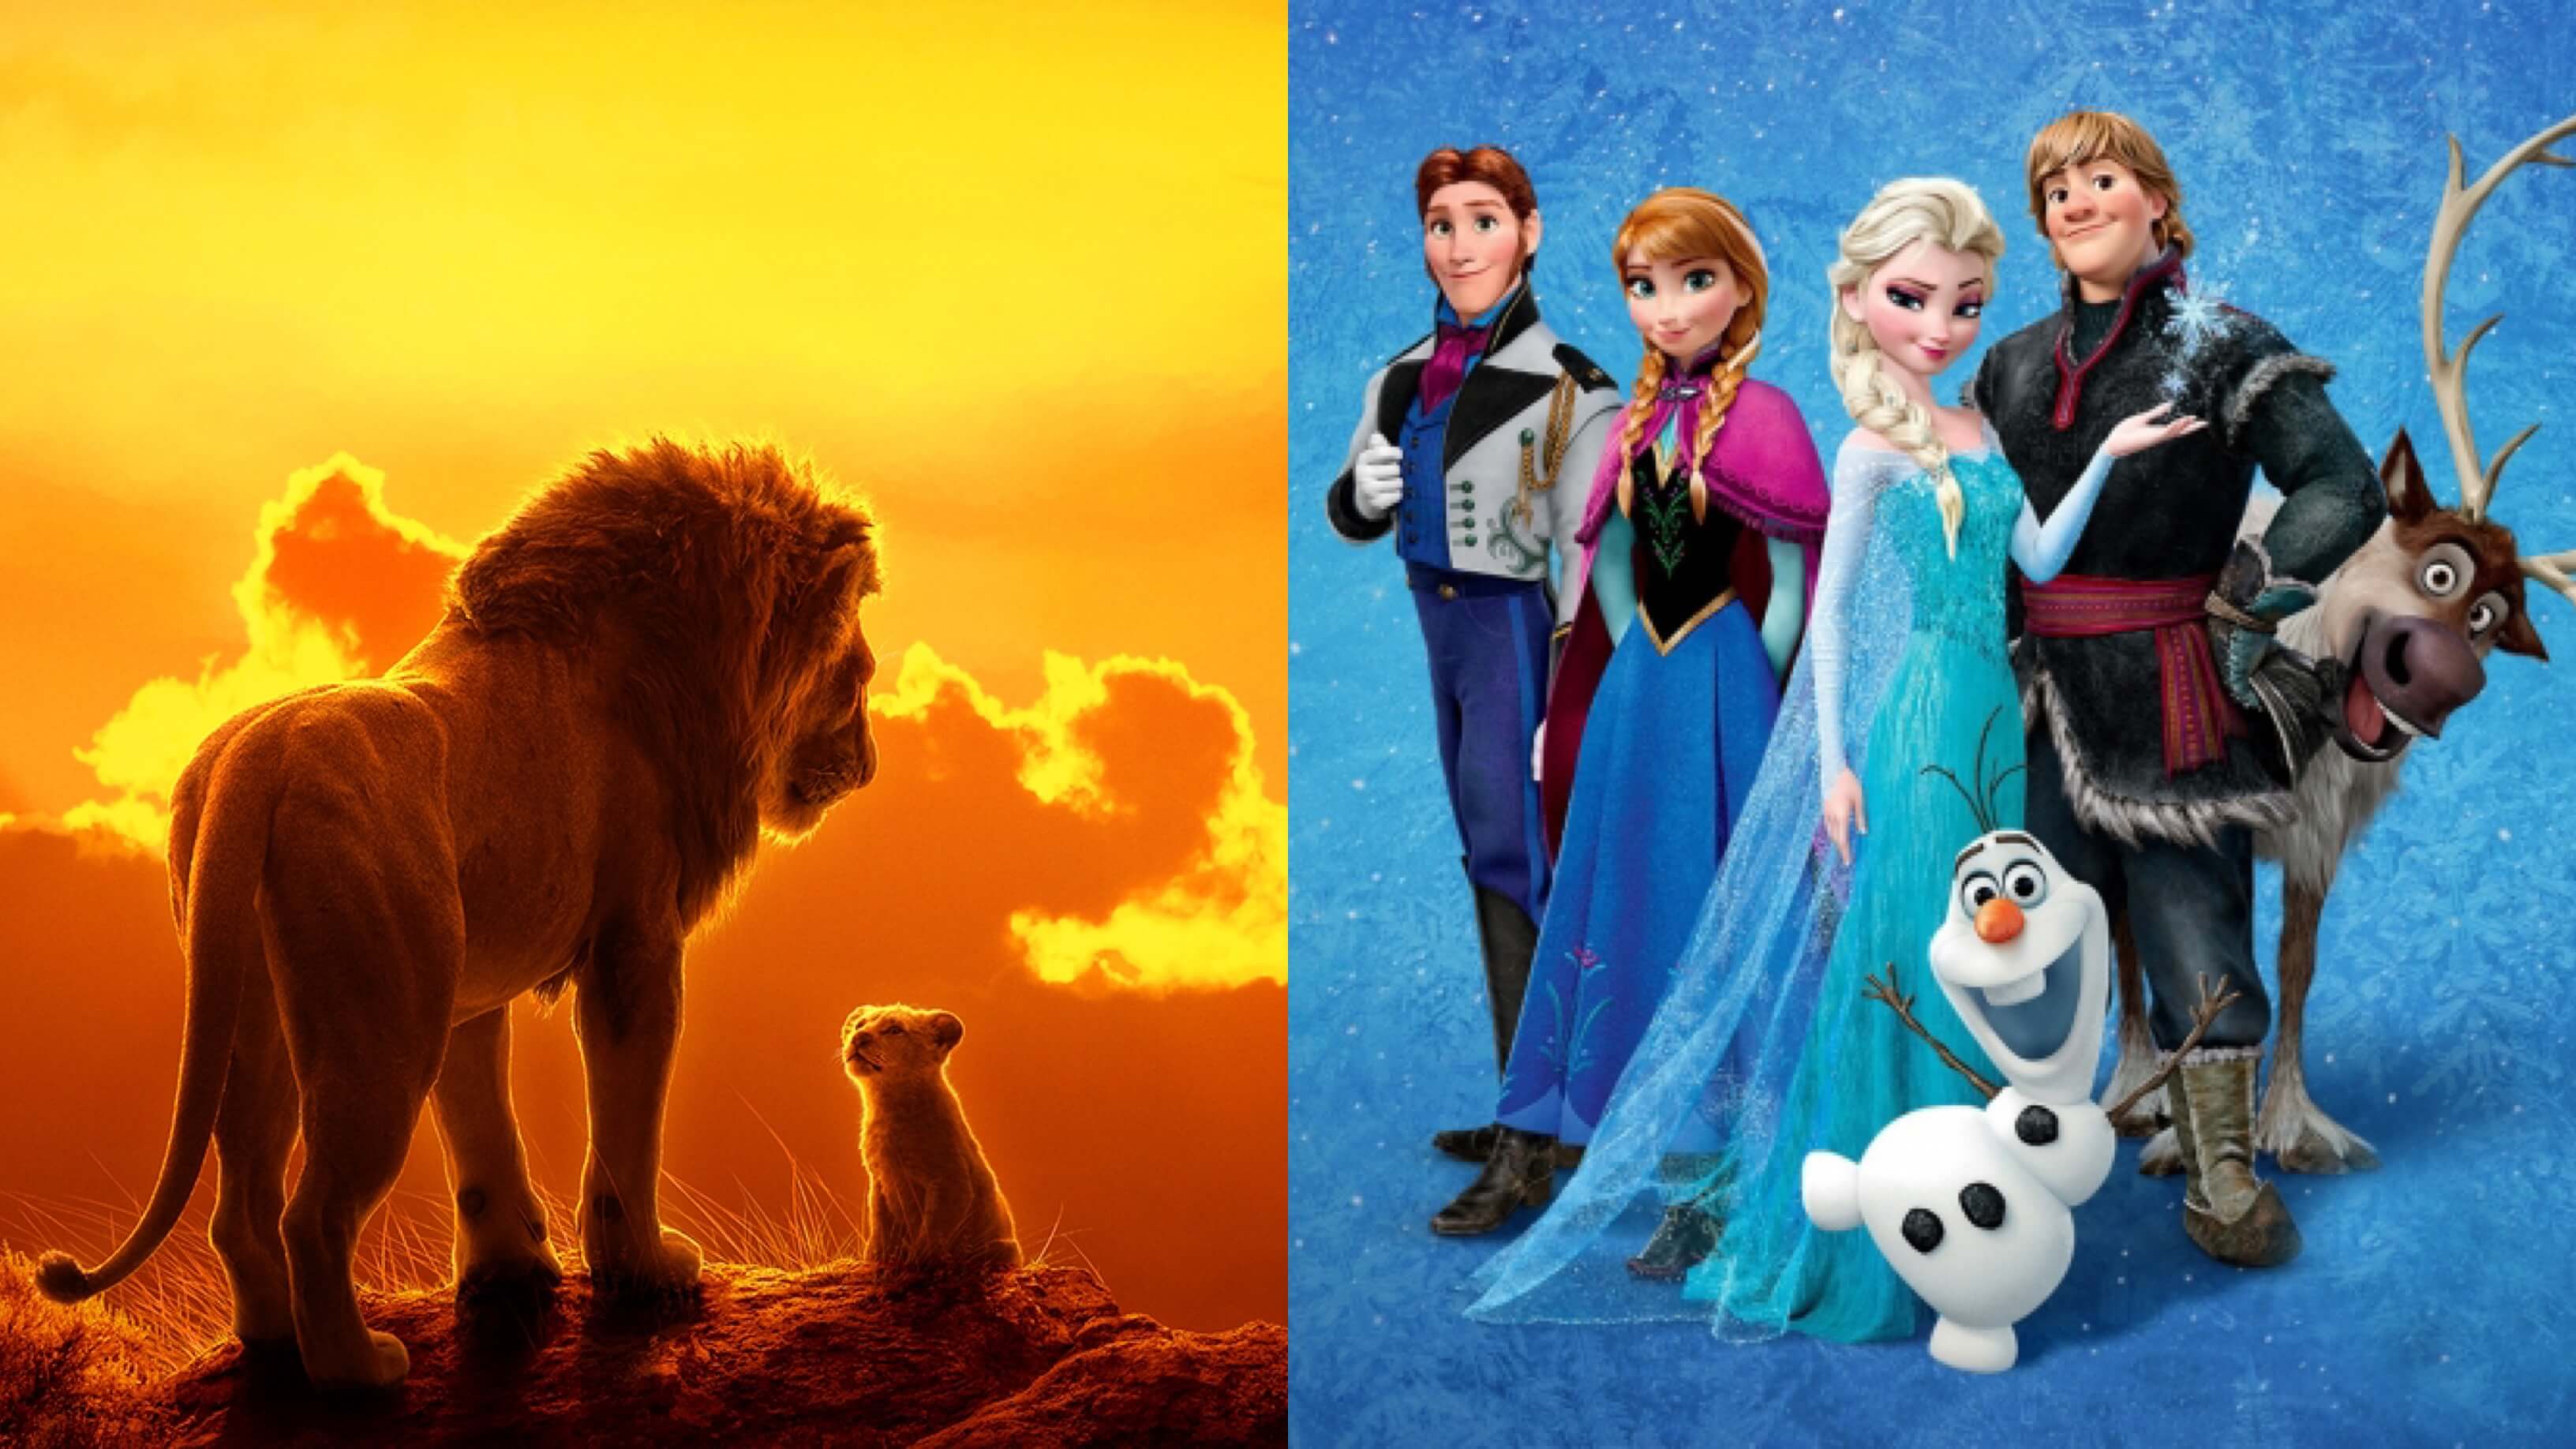 Disney’s ‘The Lion King’ Passes ‘Frozen’ To Become The Highest Grossing Animated Film of All Time